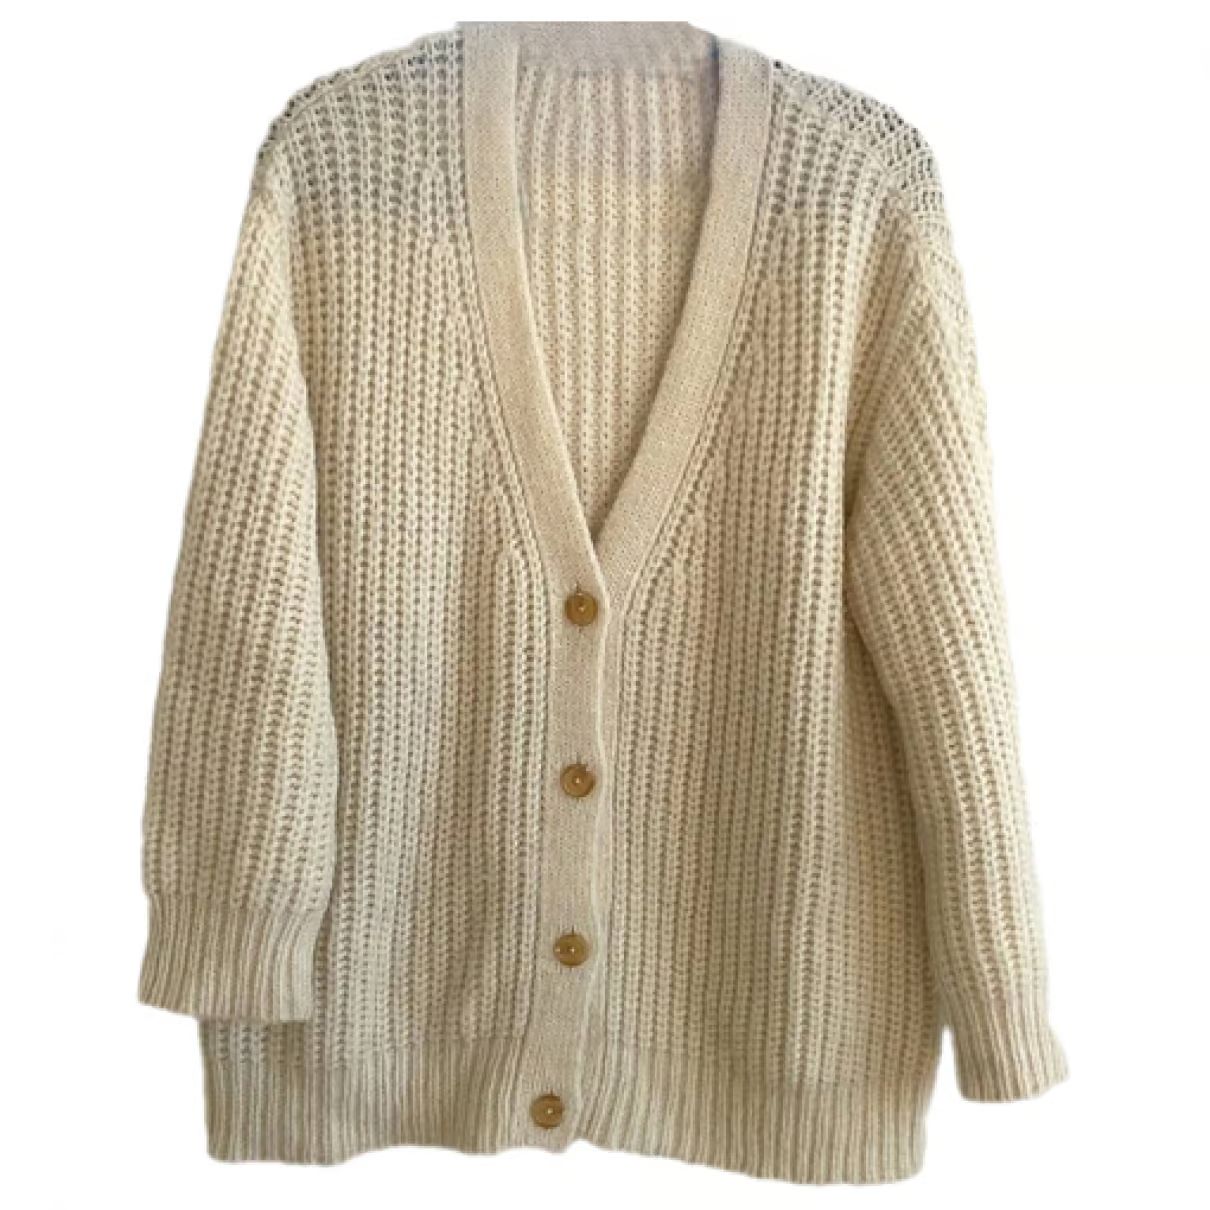 Wool cardigan Jenni Kayne Other size XS International in Wool - 35800221 | Vestiaire Collective (Global)